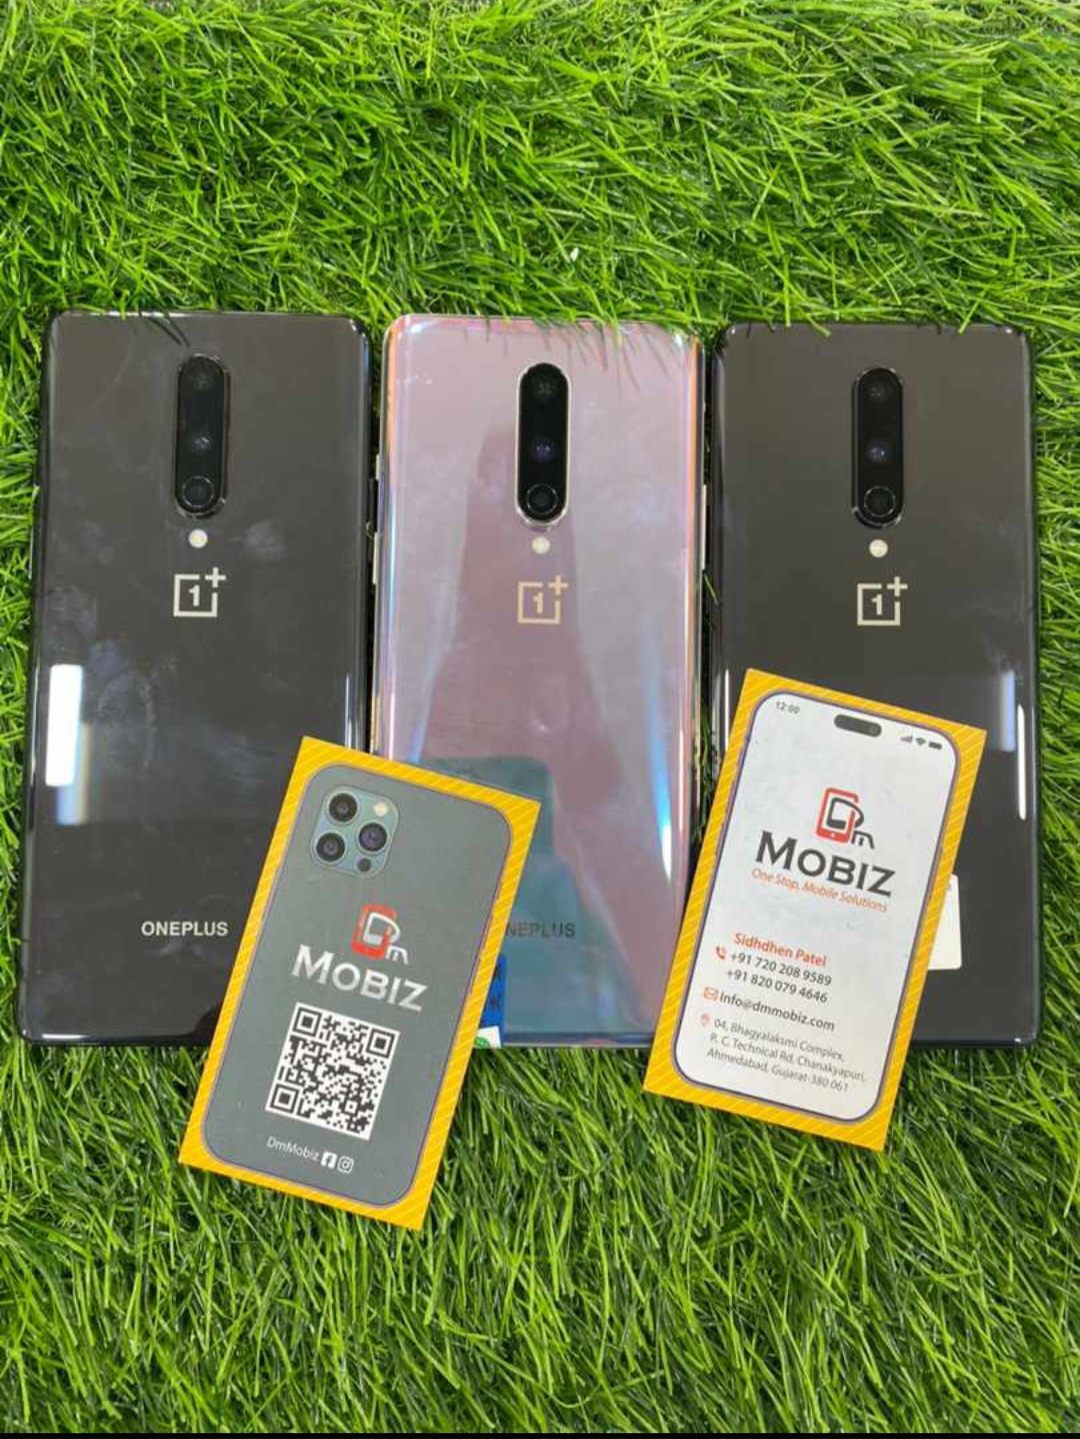 Details View - One plus 8 photos - oneplus 8 price in india,buy oneplus 8 online,oneplus 8 features and specifications,best deals on oneplus 8,oneplus 8 emi options,oneplus 8 review india,oneplus 8 international version,oneplus 8 charger reliability,oneplus 8 sleek design,oneplus 8 tech enthusiasts,reseller bazzar